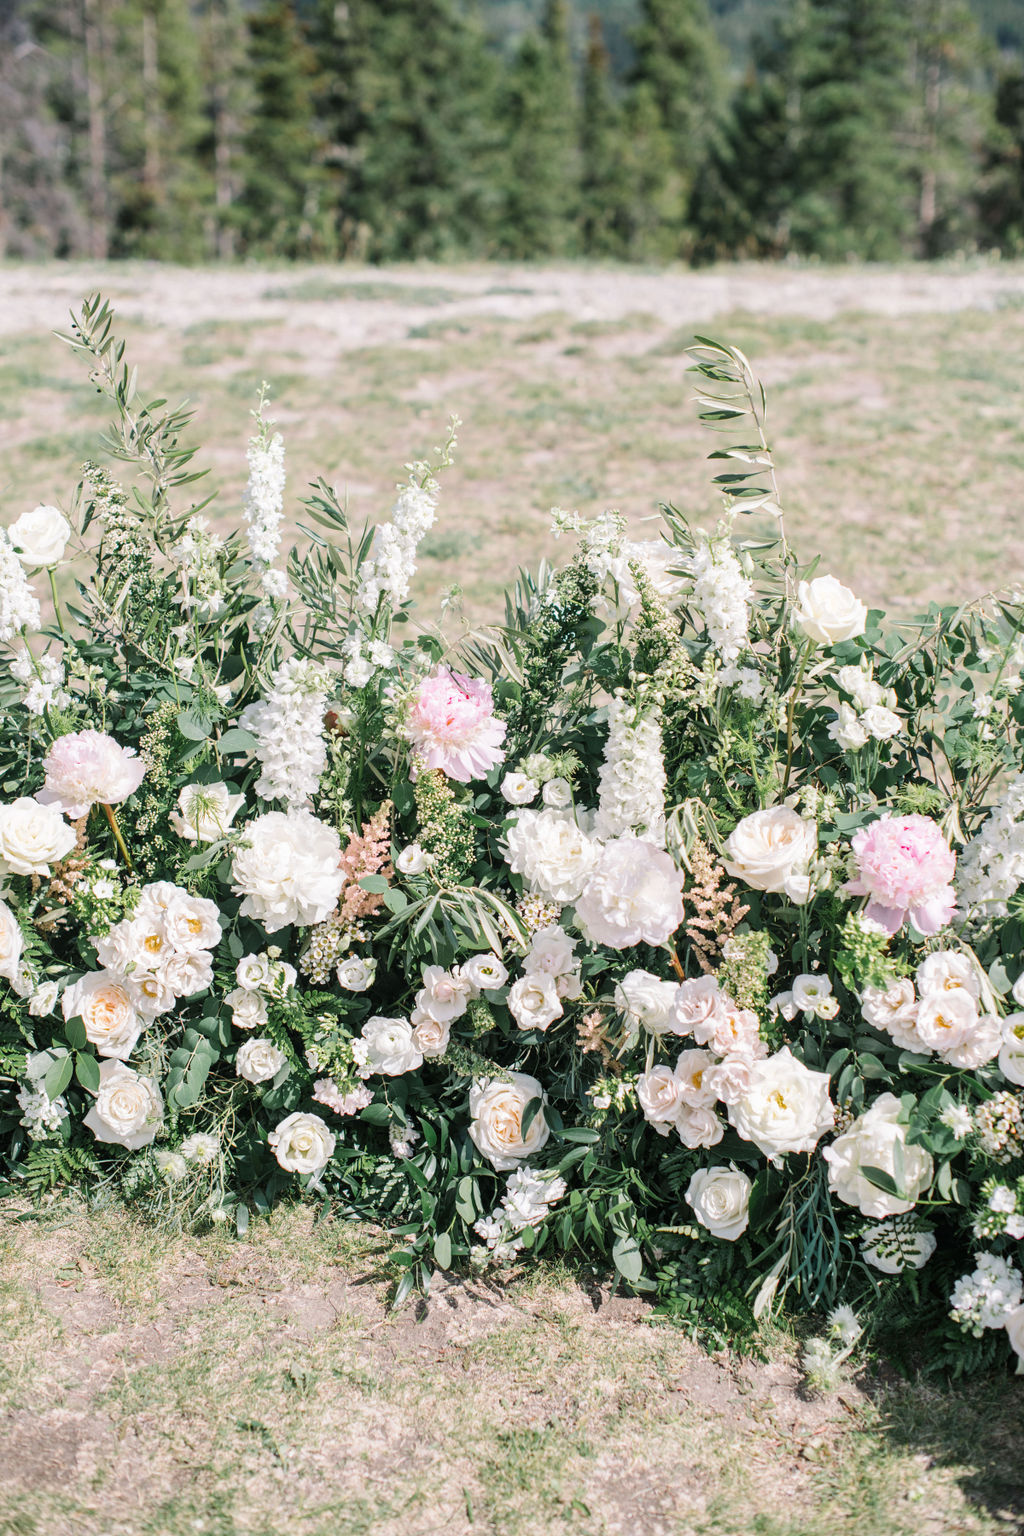 Elegant grounded ceremony floral arch featuring white roses, pink peonies, and greenery by Flowers by Janie. Sophisticated mountain wedding inspiration in Banff, Alberta, Canada. 